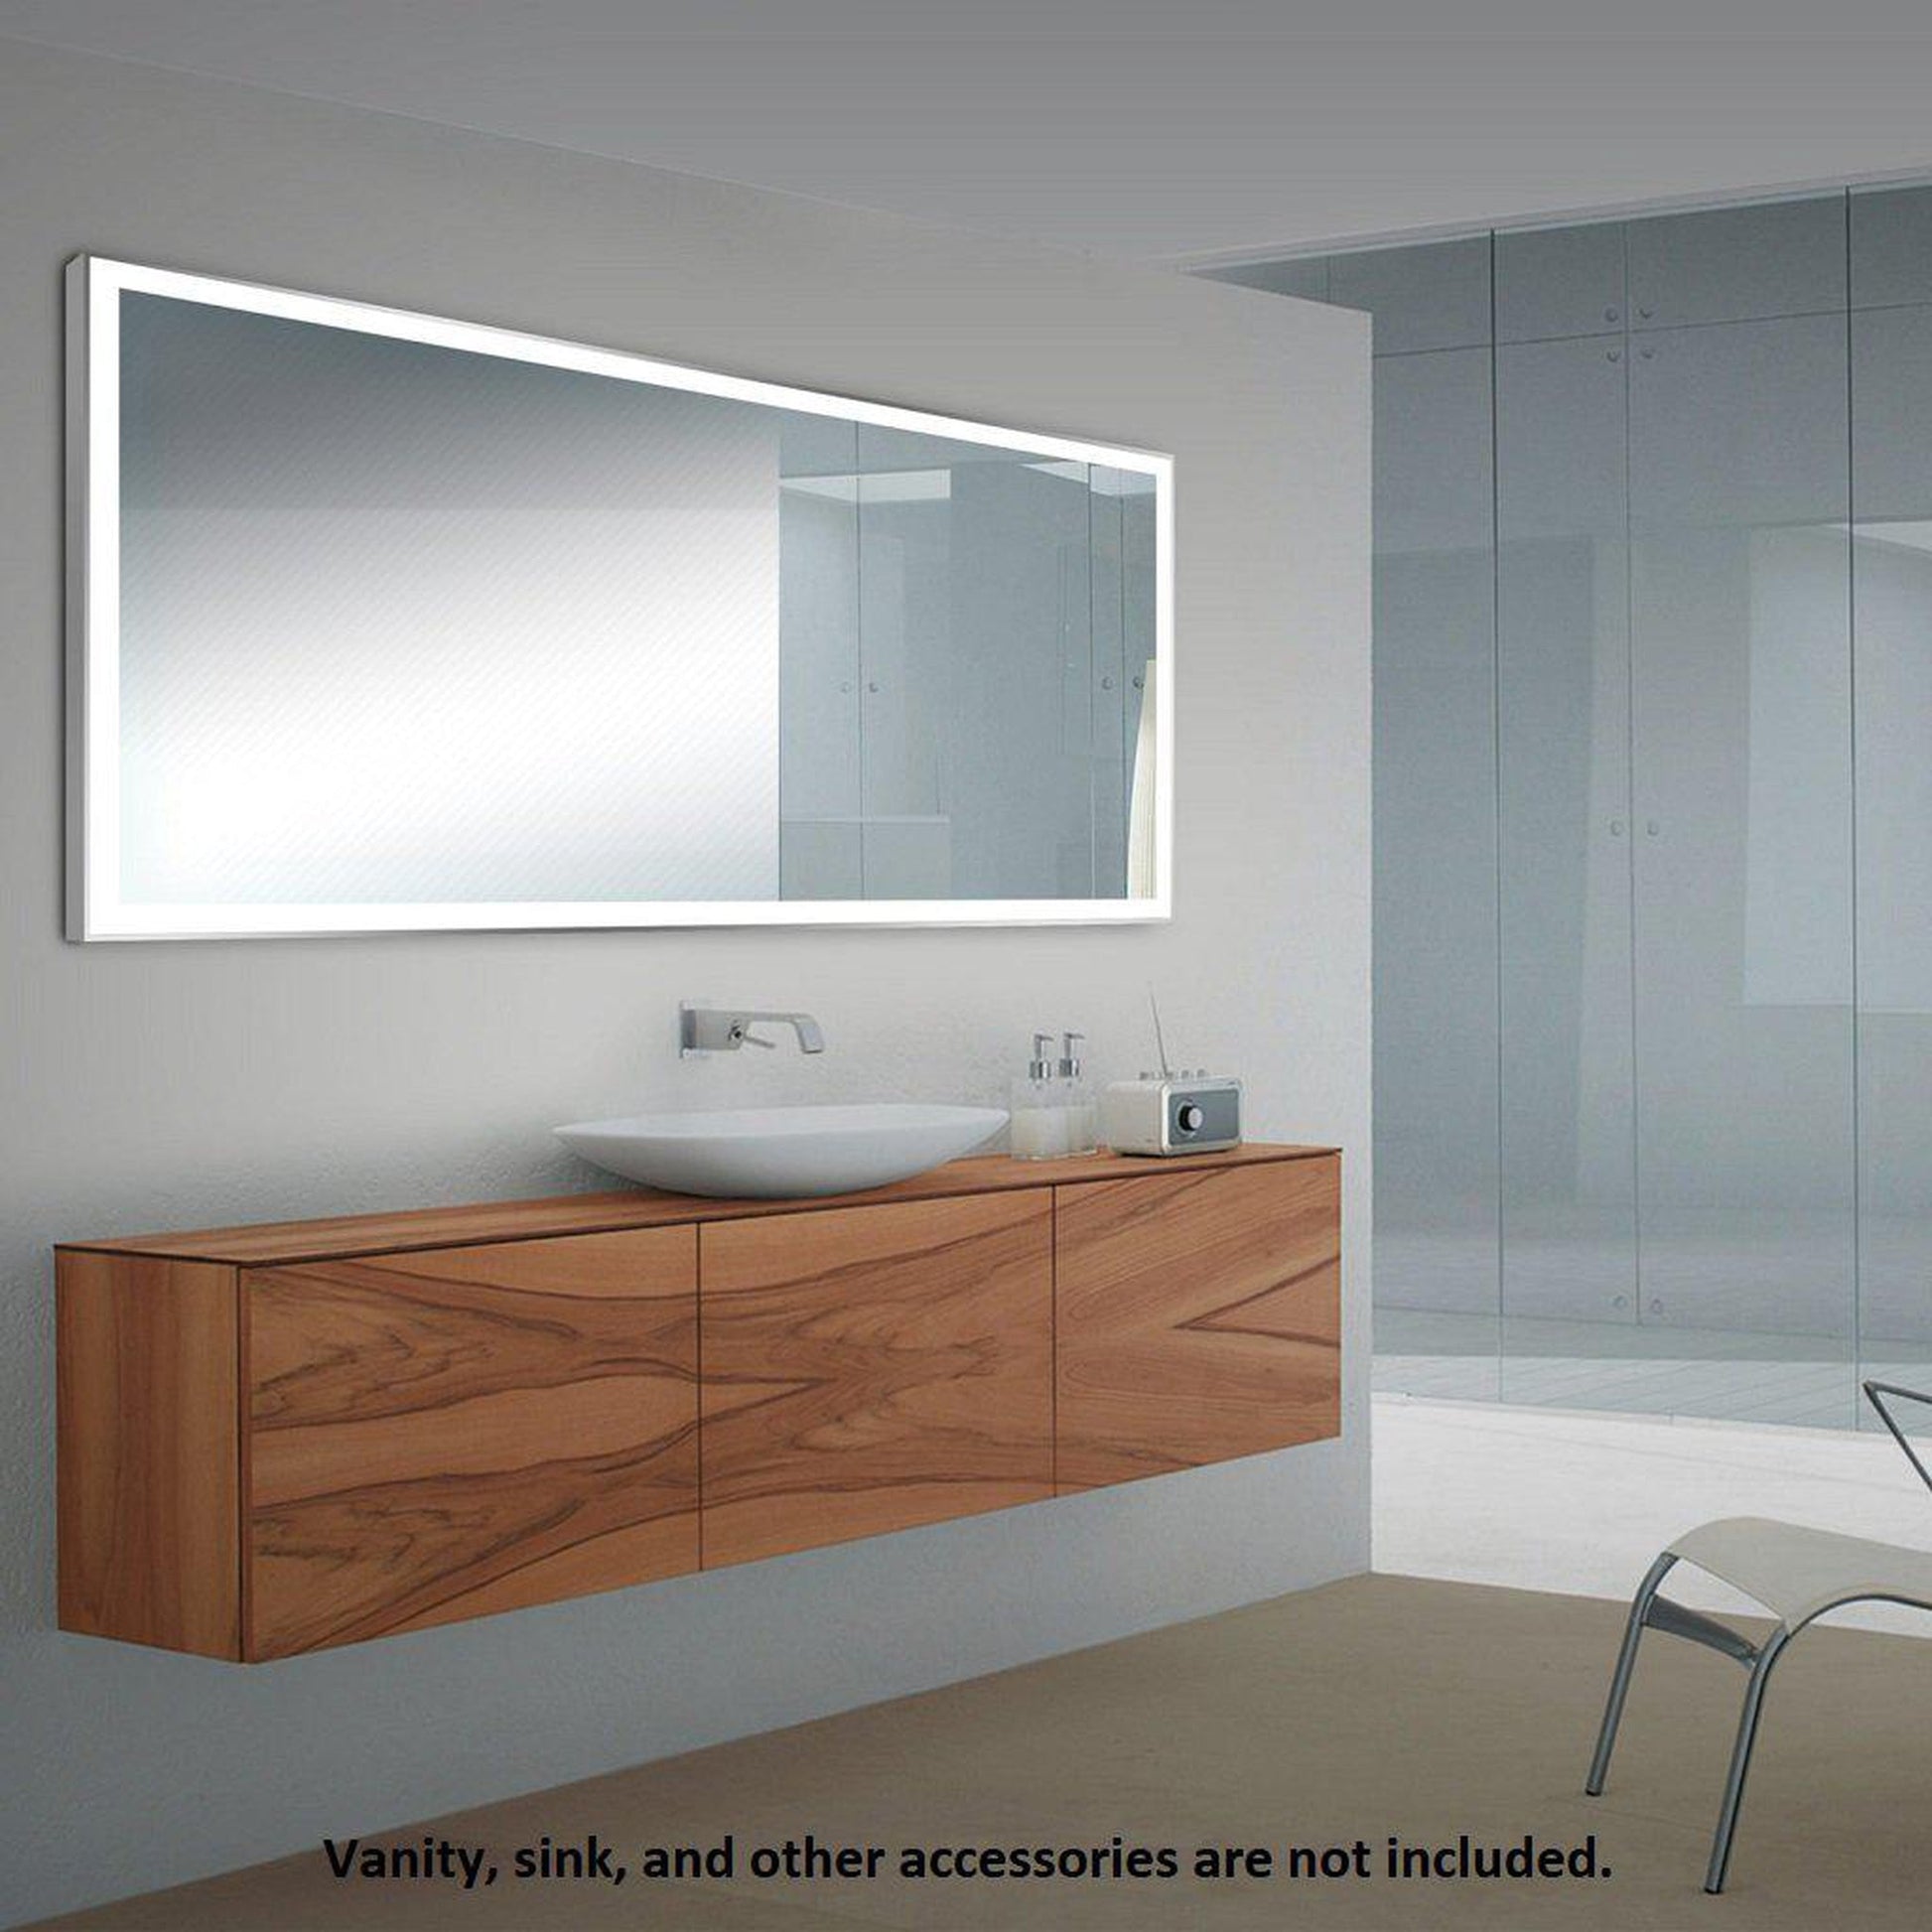 Lighted Impressions Laguna 47.25" x 23.625" Rectangular Frameless Wall-Mounted LED Mirror With 3-Section Rocker Switch